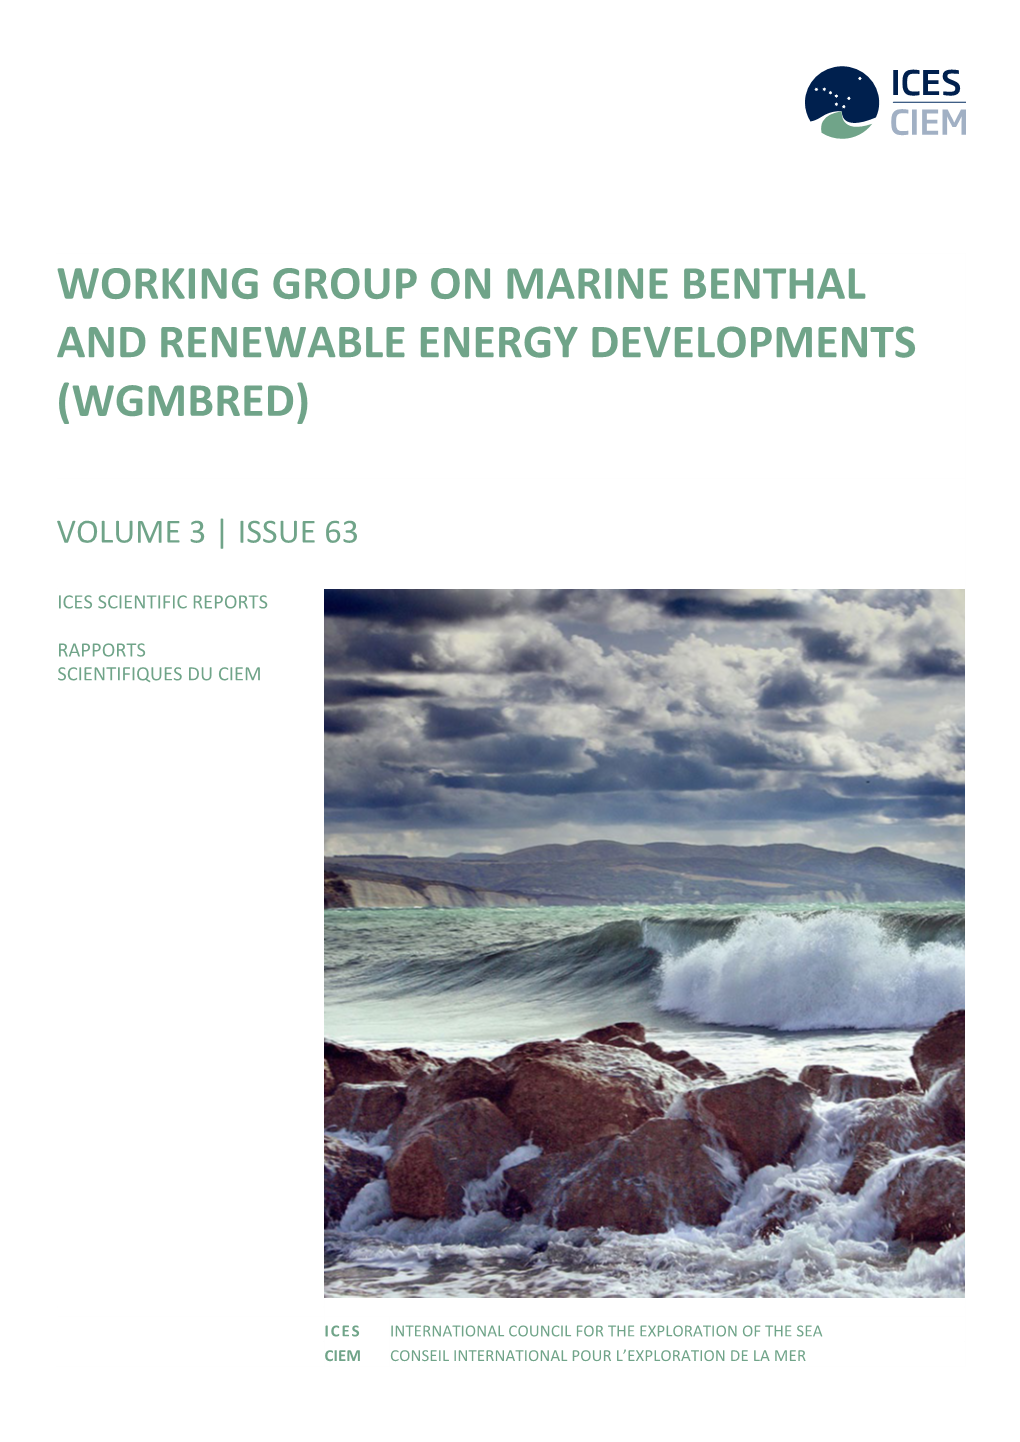 Working Group on Marine Benthal and Renewable Energy Developments (Wgmbred)